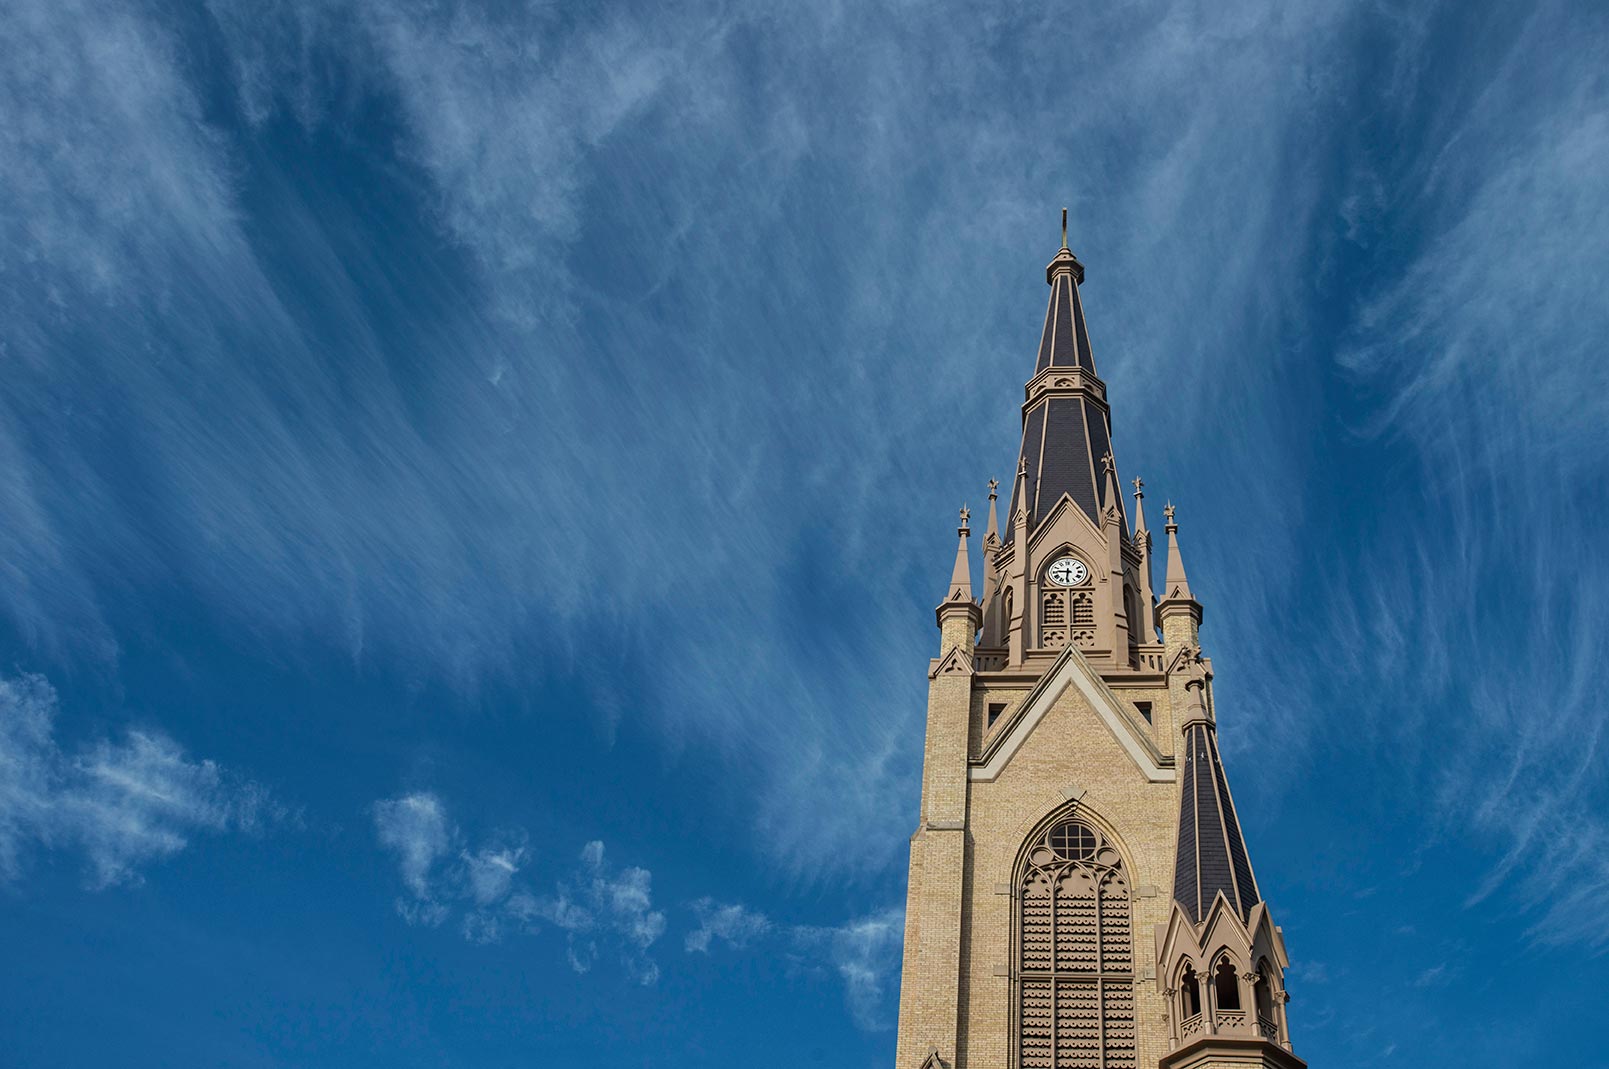 Oct. 22, 2014; Cirrus clouds form above the steeple on the Basilica of the Sacred Heart. (Photo by Barbara Johnston/University of Notre Dame)